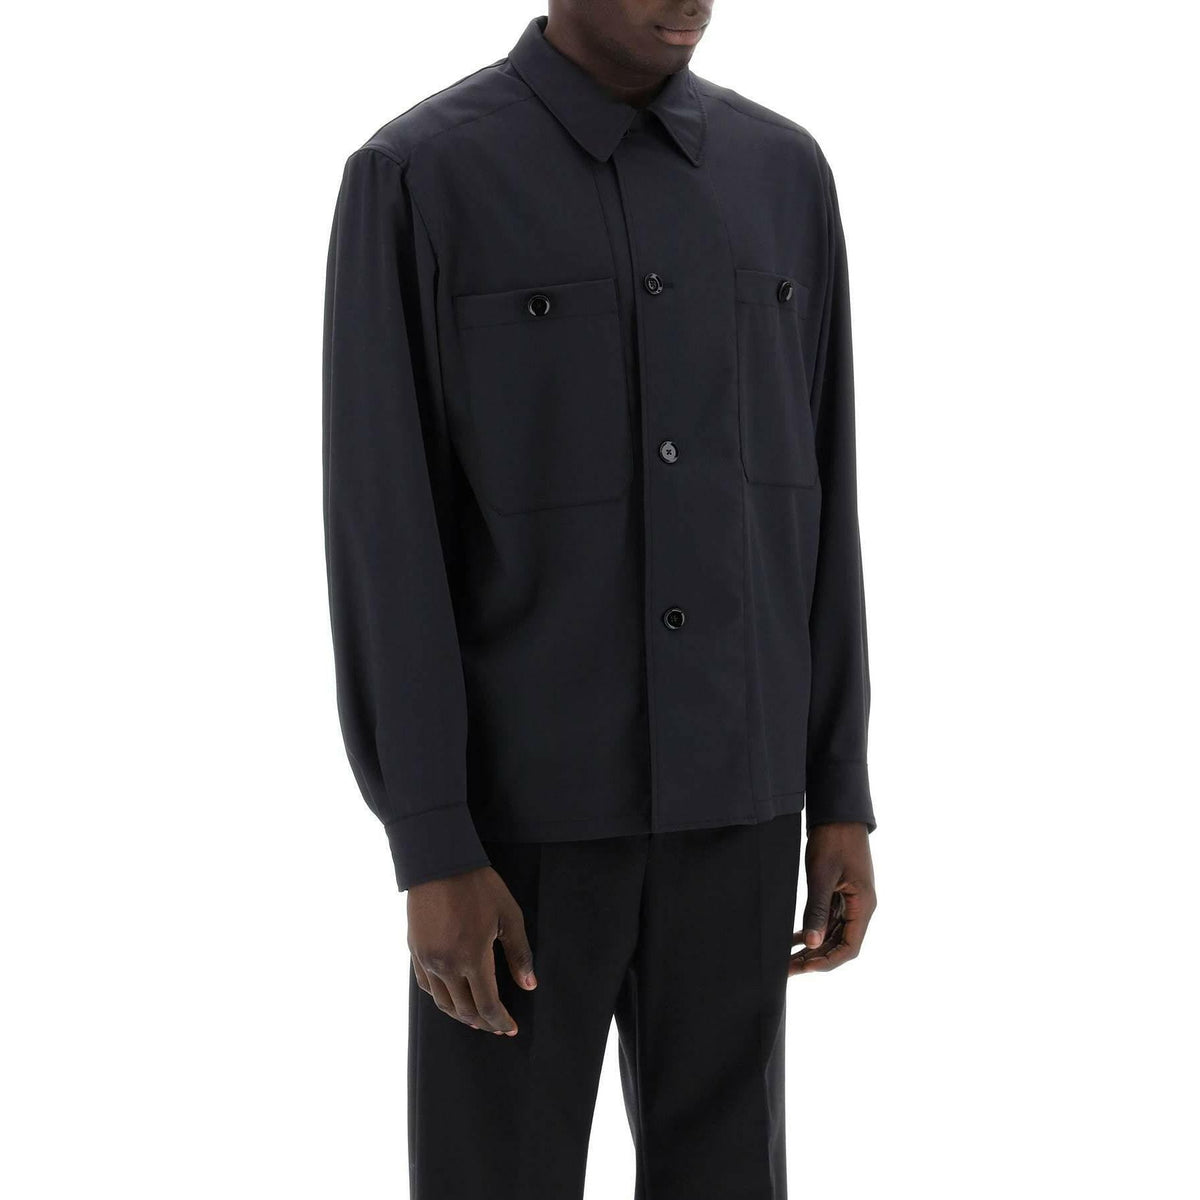 Jet Black Soft Military Light Wool Overshirt with Double Placket LEMAIRE JOHN JULIA.